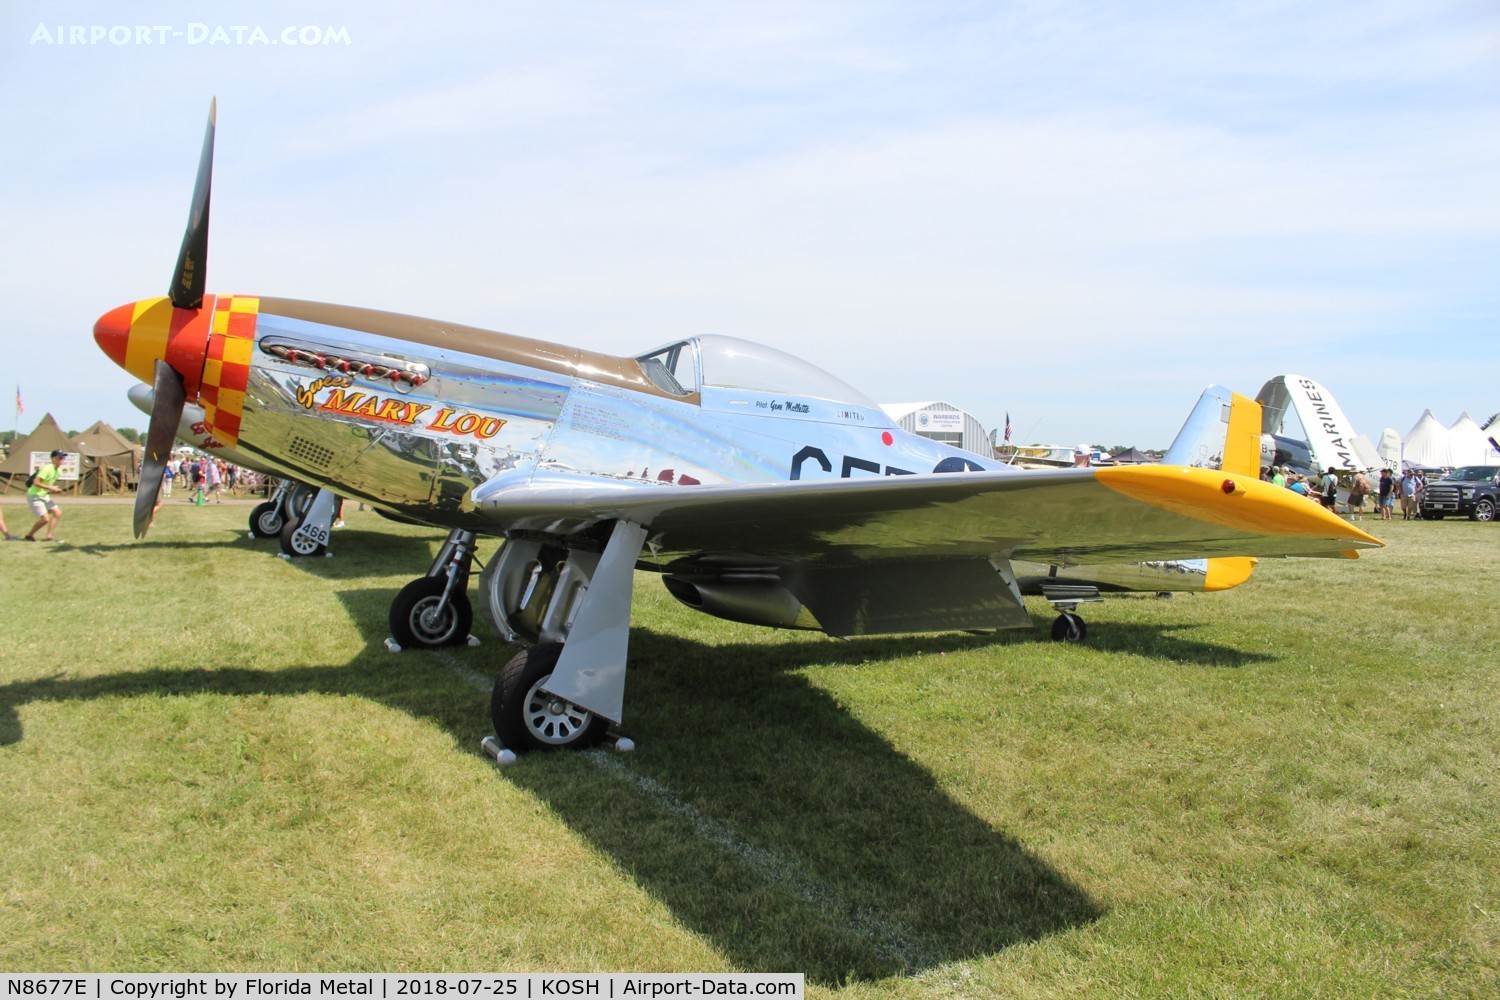 N8677E, 1944 North American F-51D Mustang C/N 44-74865, Mary Lou